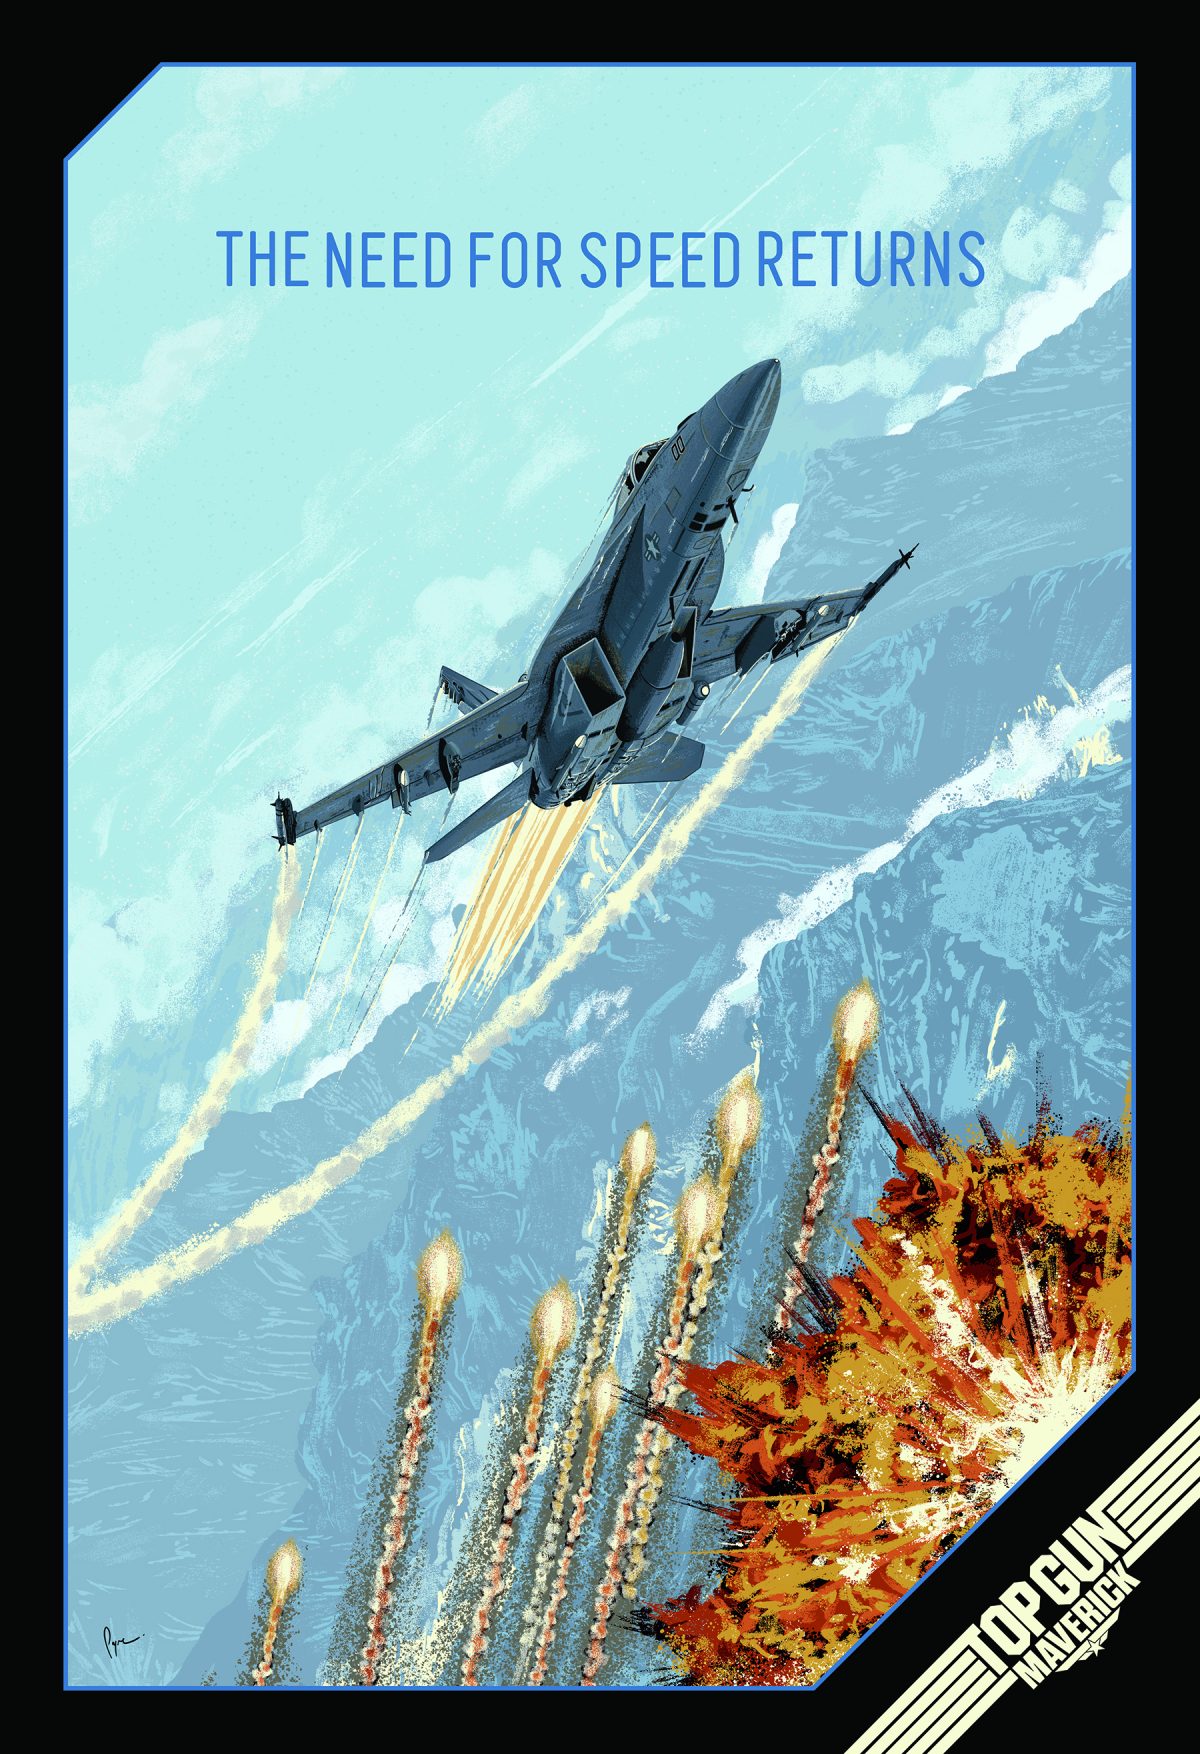 download the new version for android Top Gun: Maverick